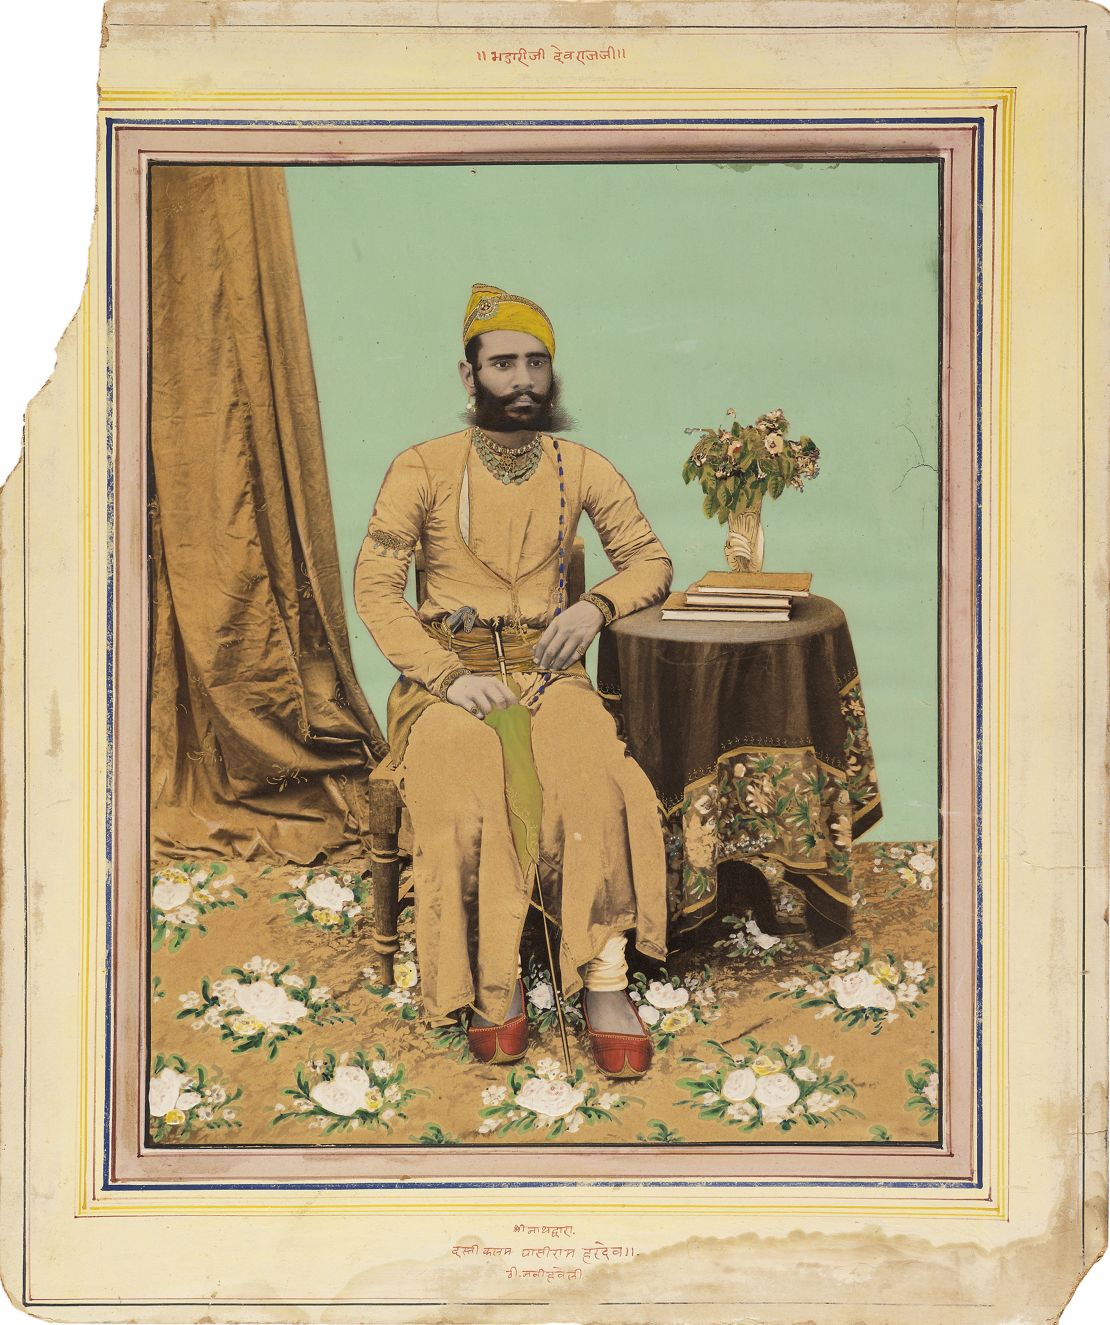 A portrait from the 1890s demonstrating a tendency in India to paint heavily over photographs.